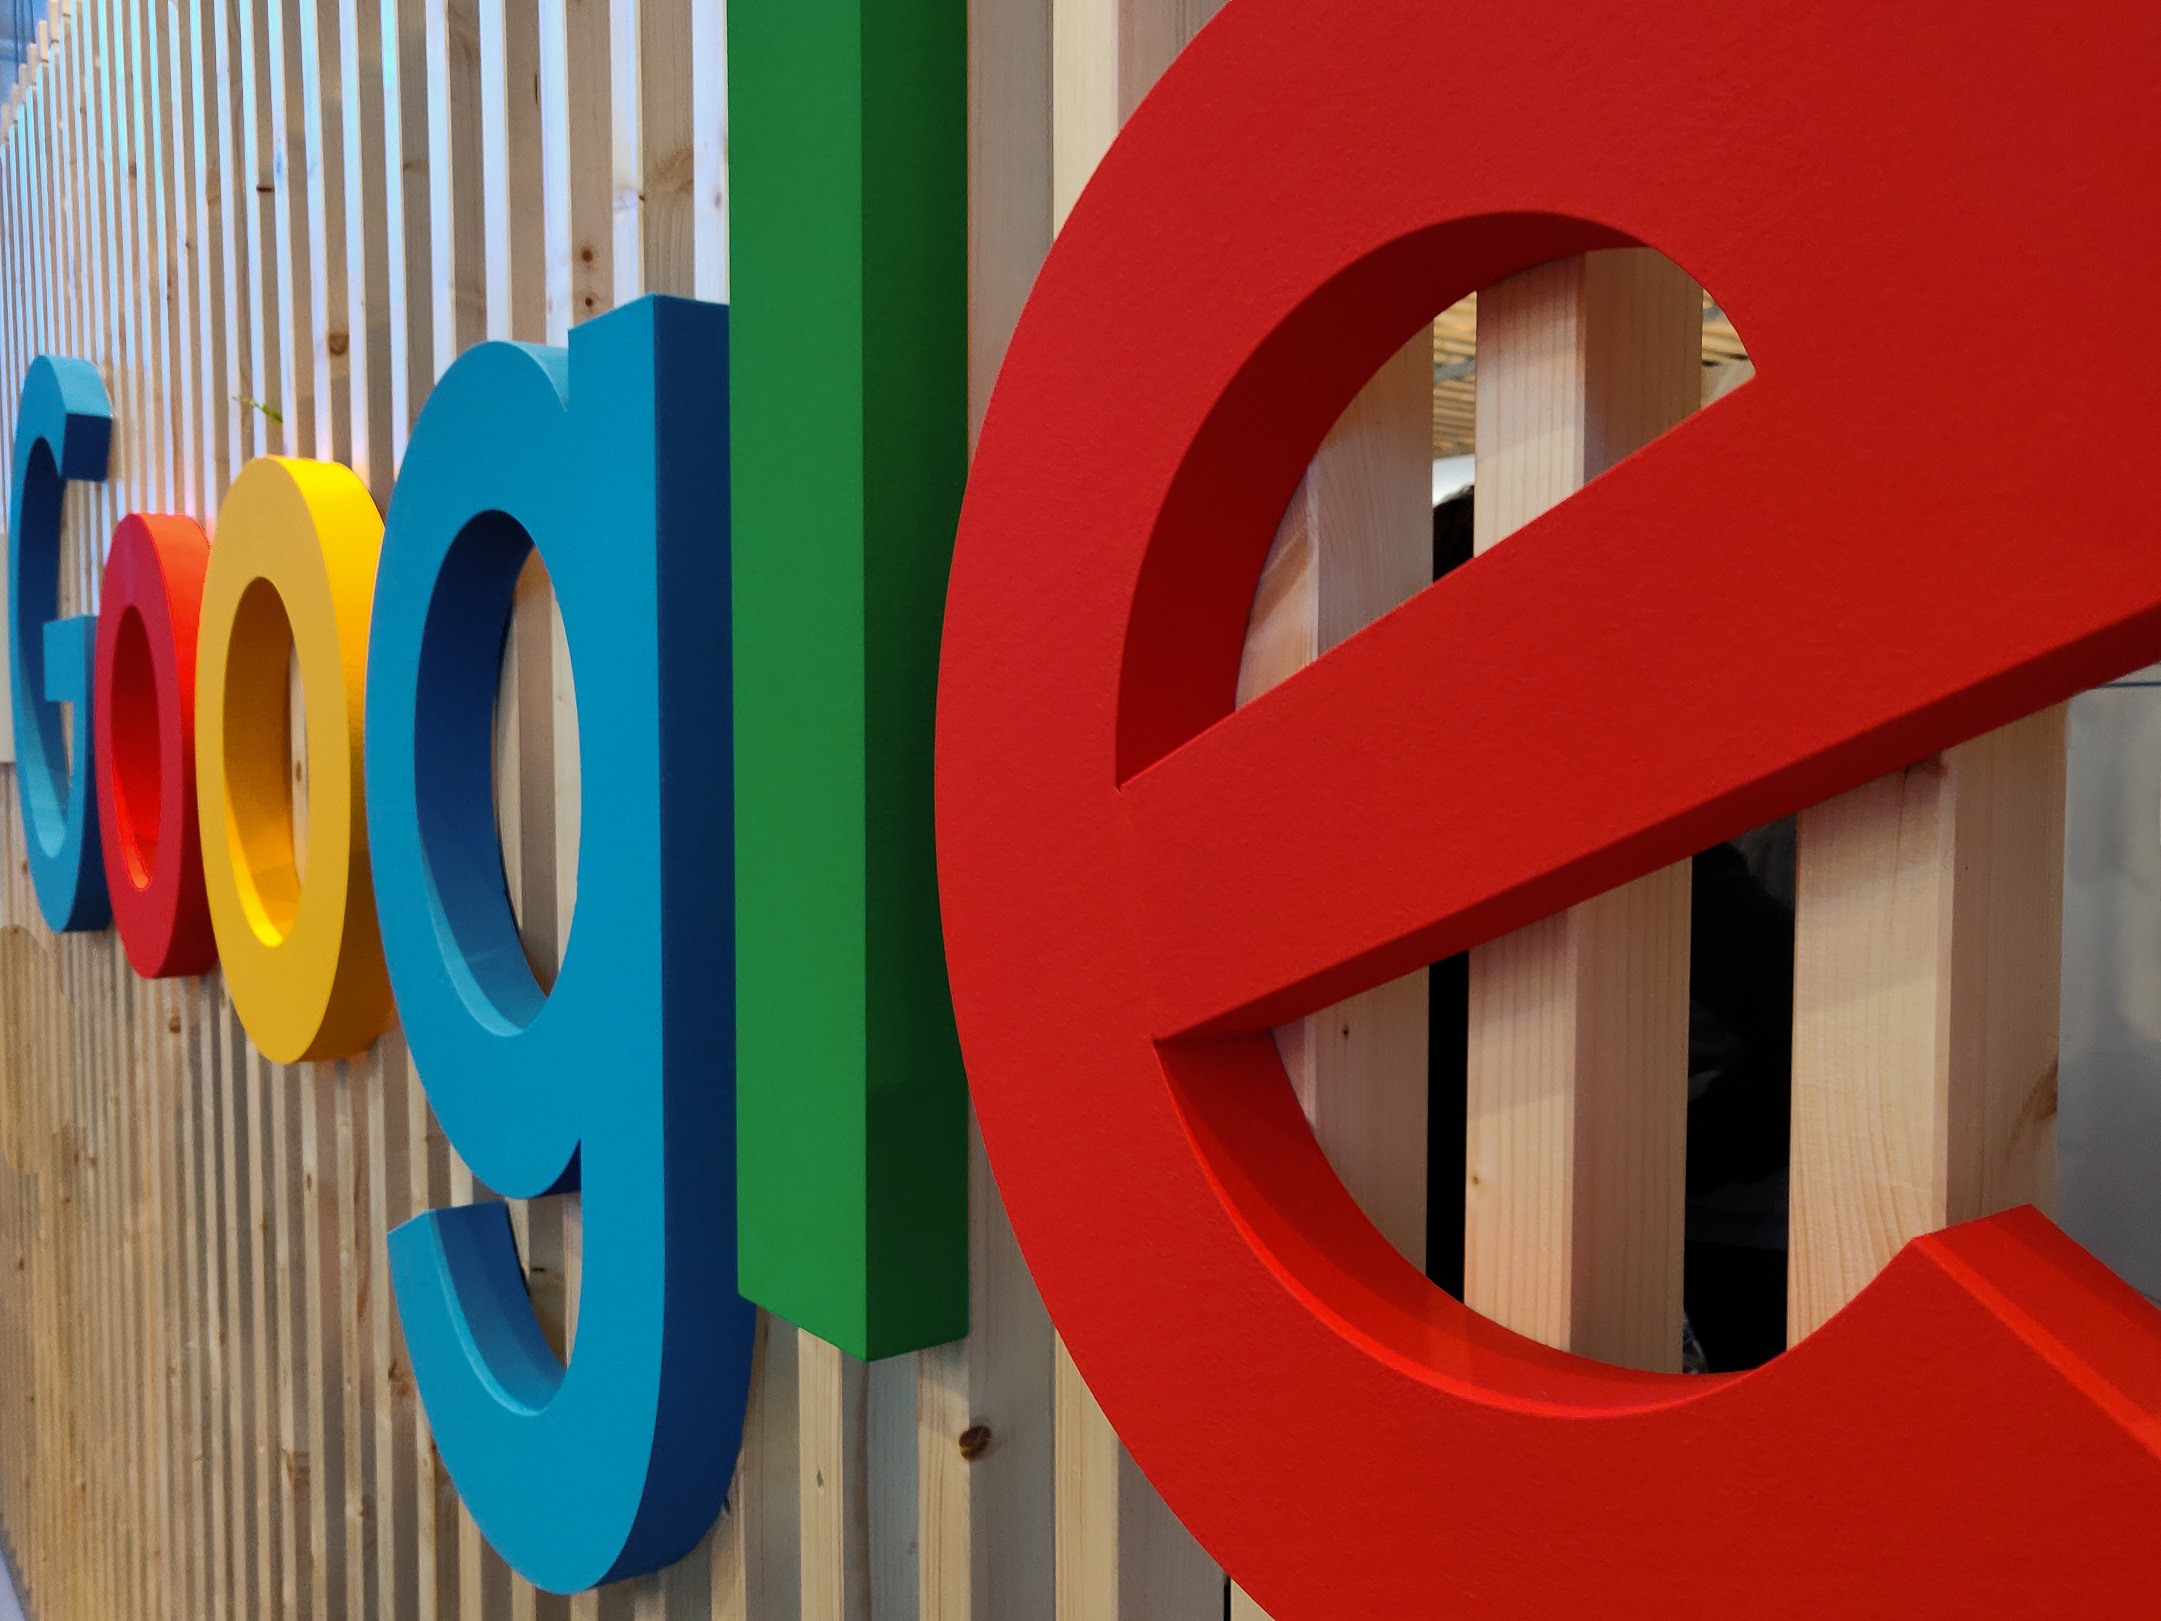 Google’s net digital ad revenues to fall in 2020 – report